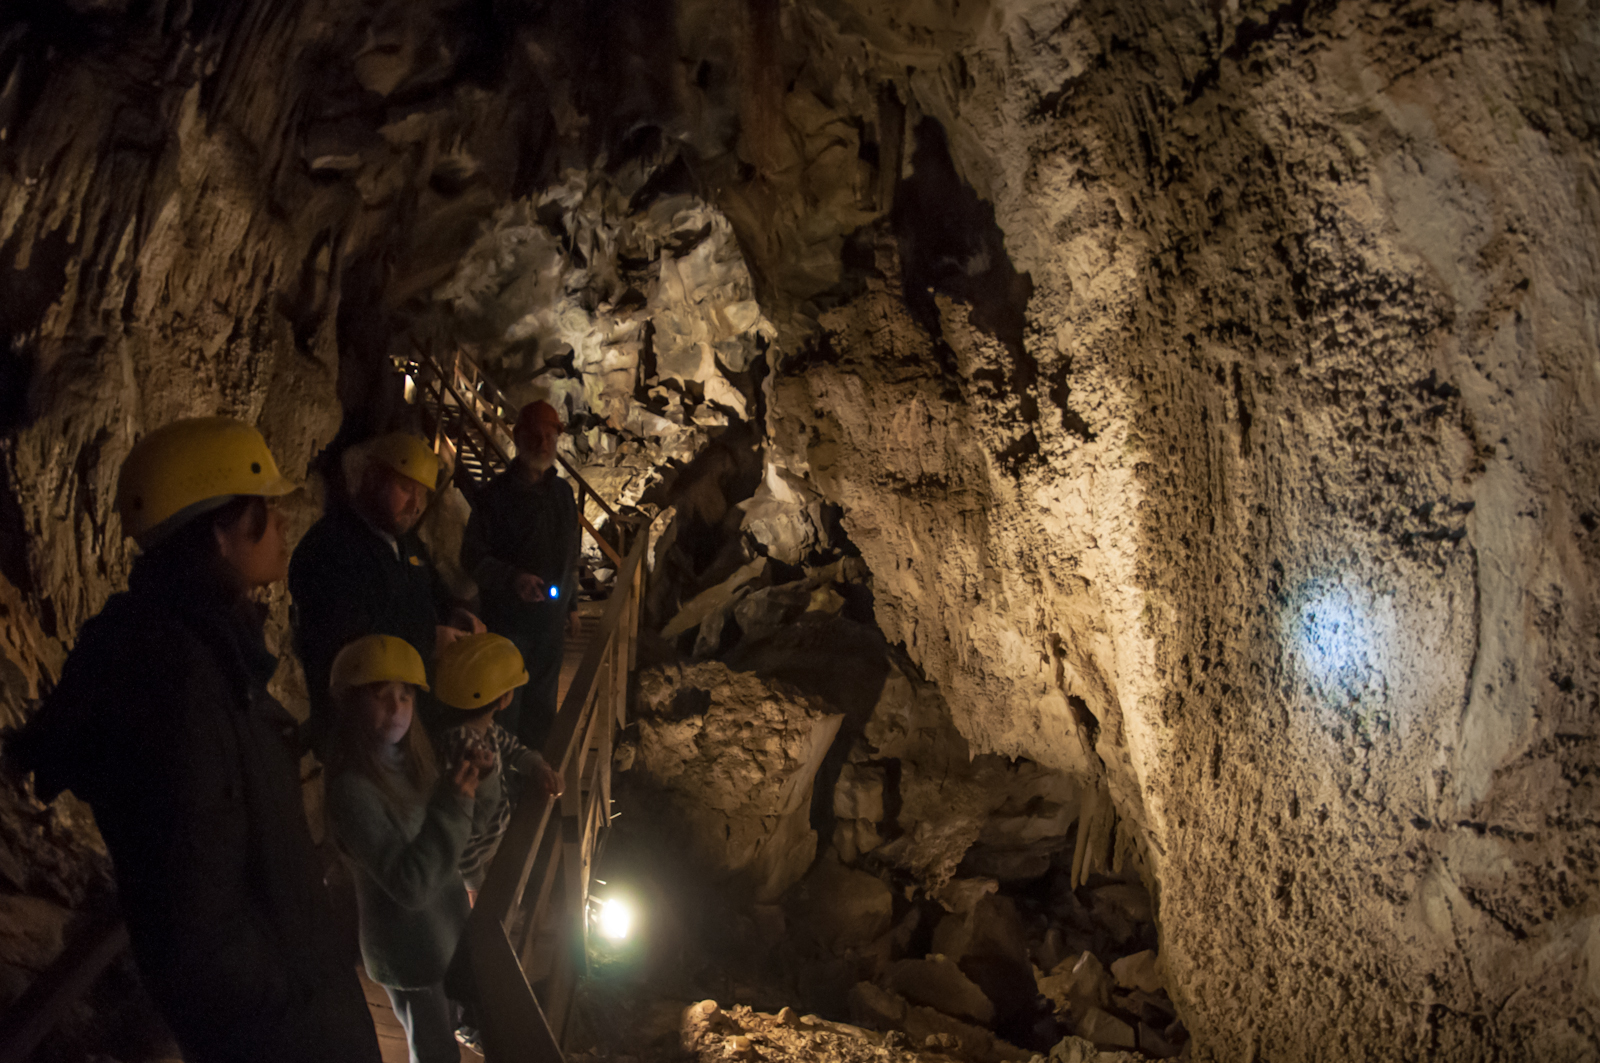 Ngarua Caves - Some Austrians in New Zealand